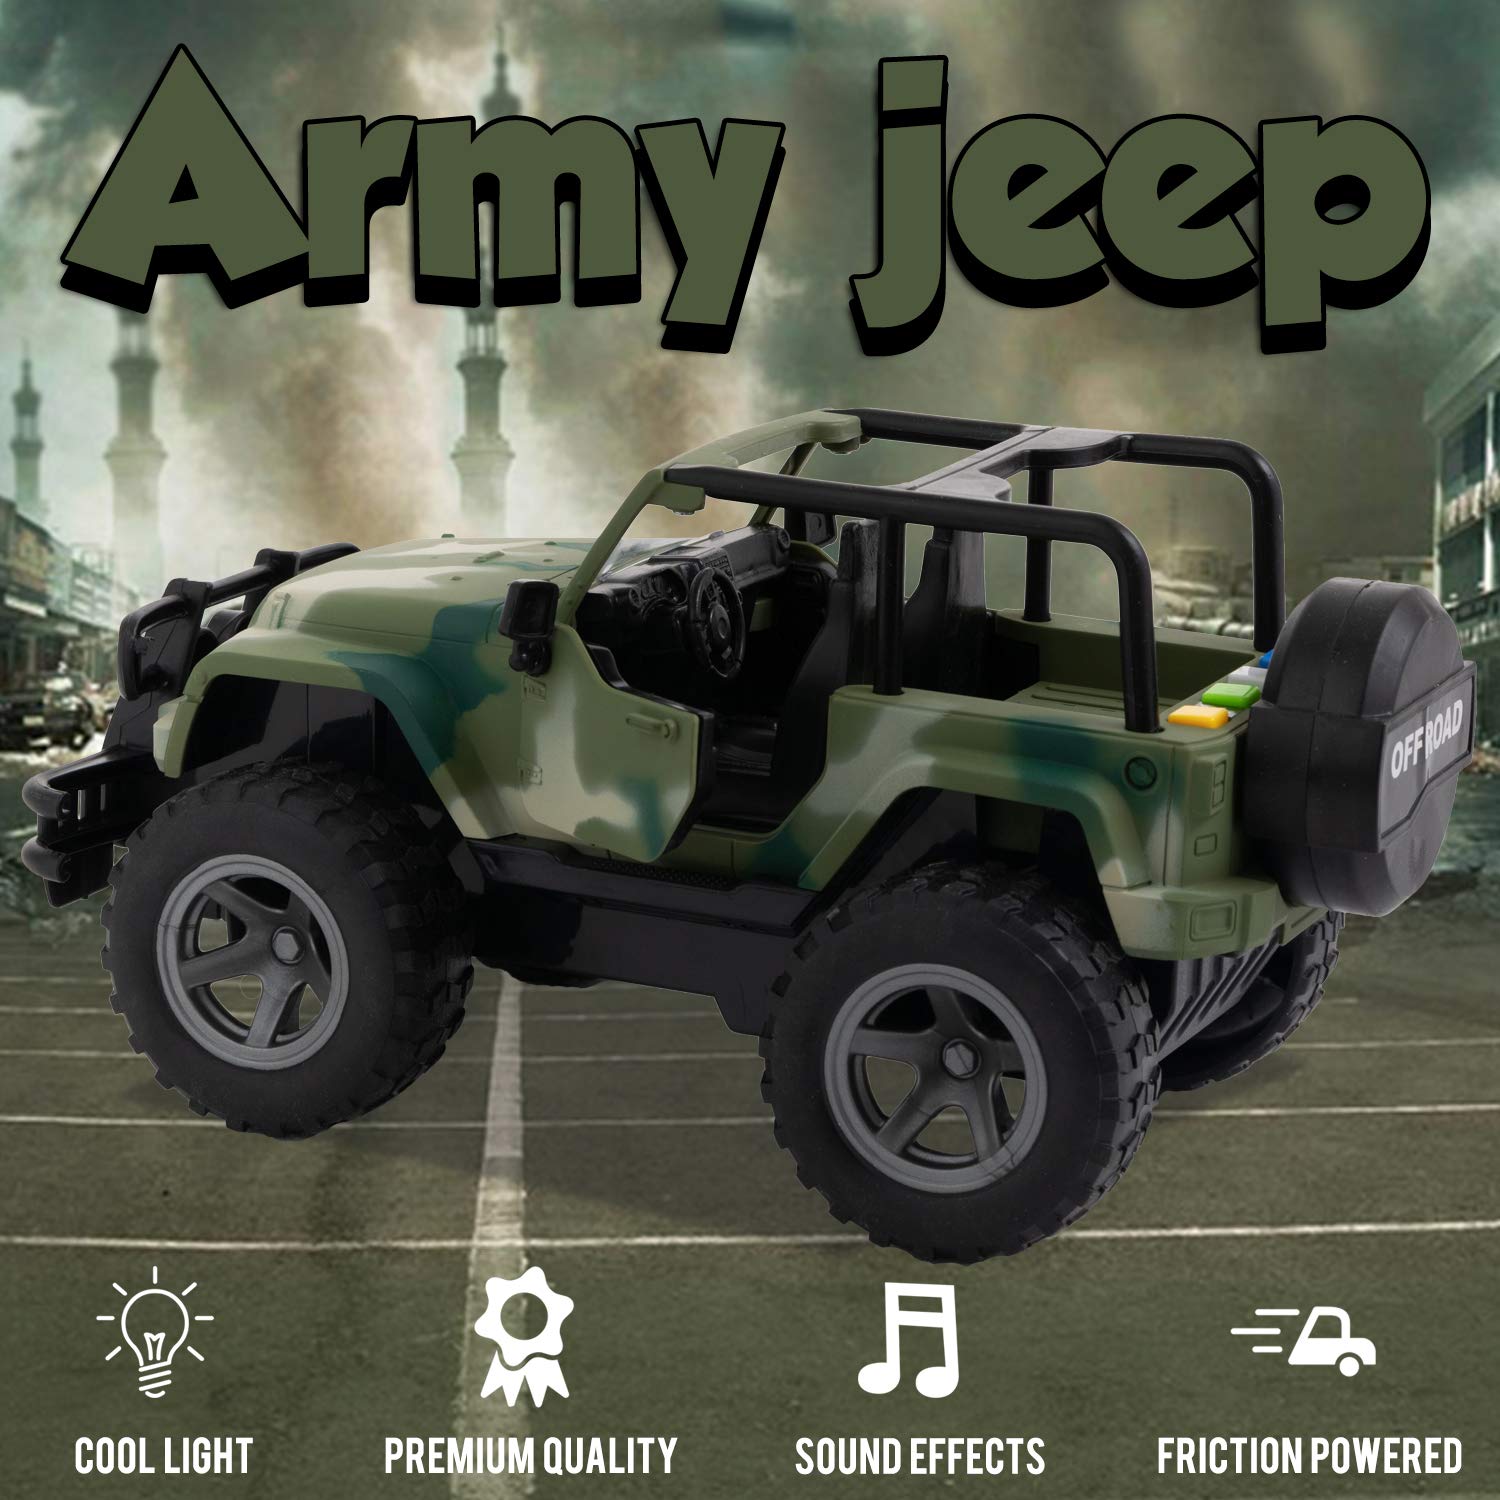 Friction Military Jeep